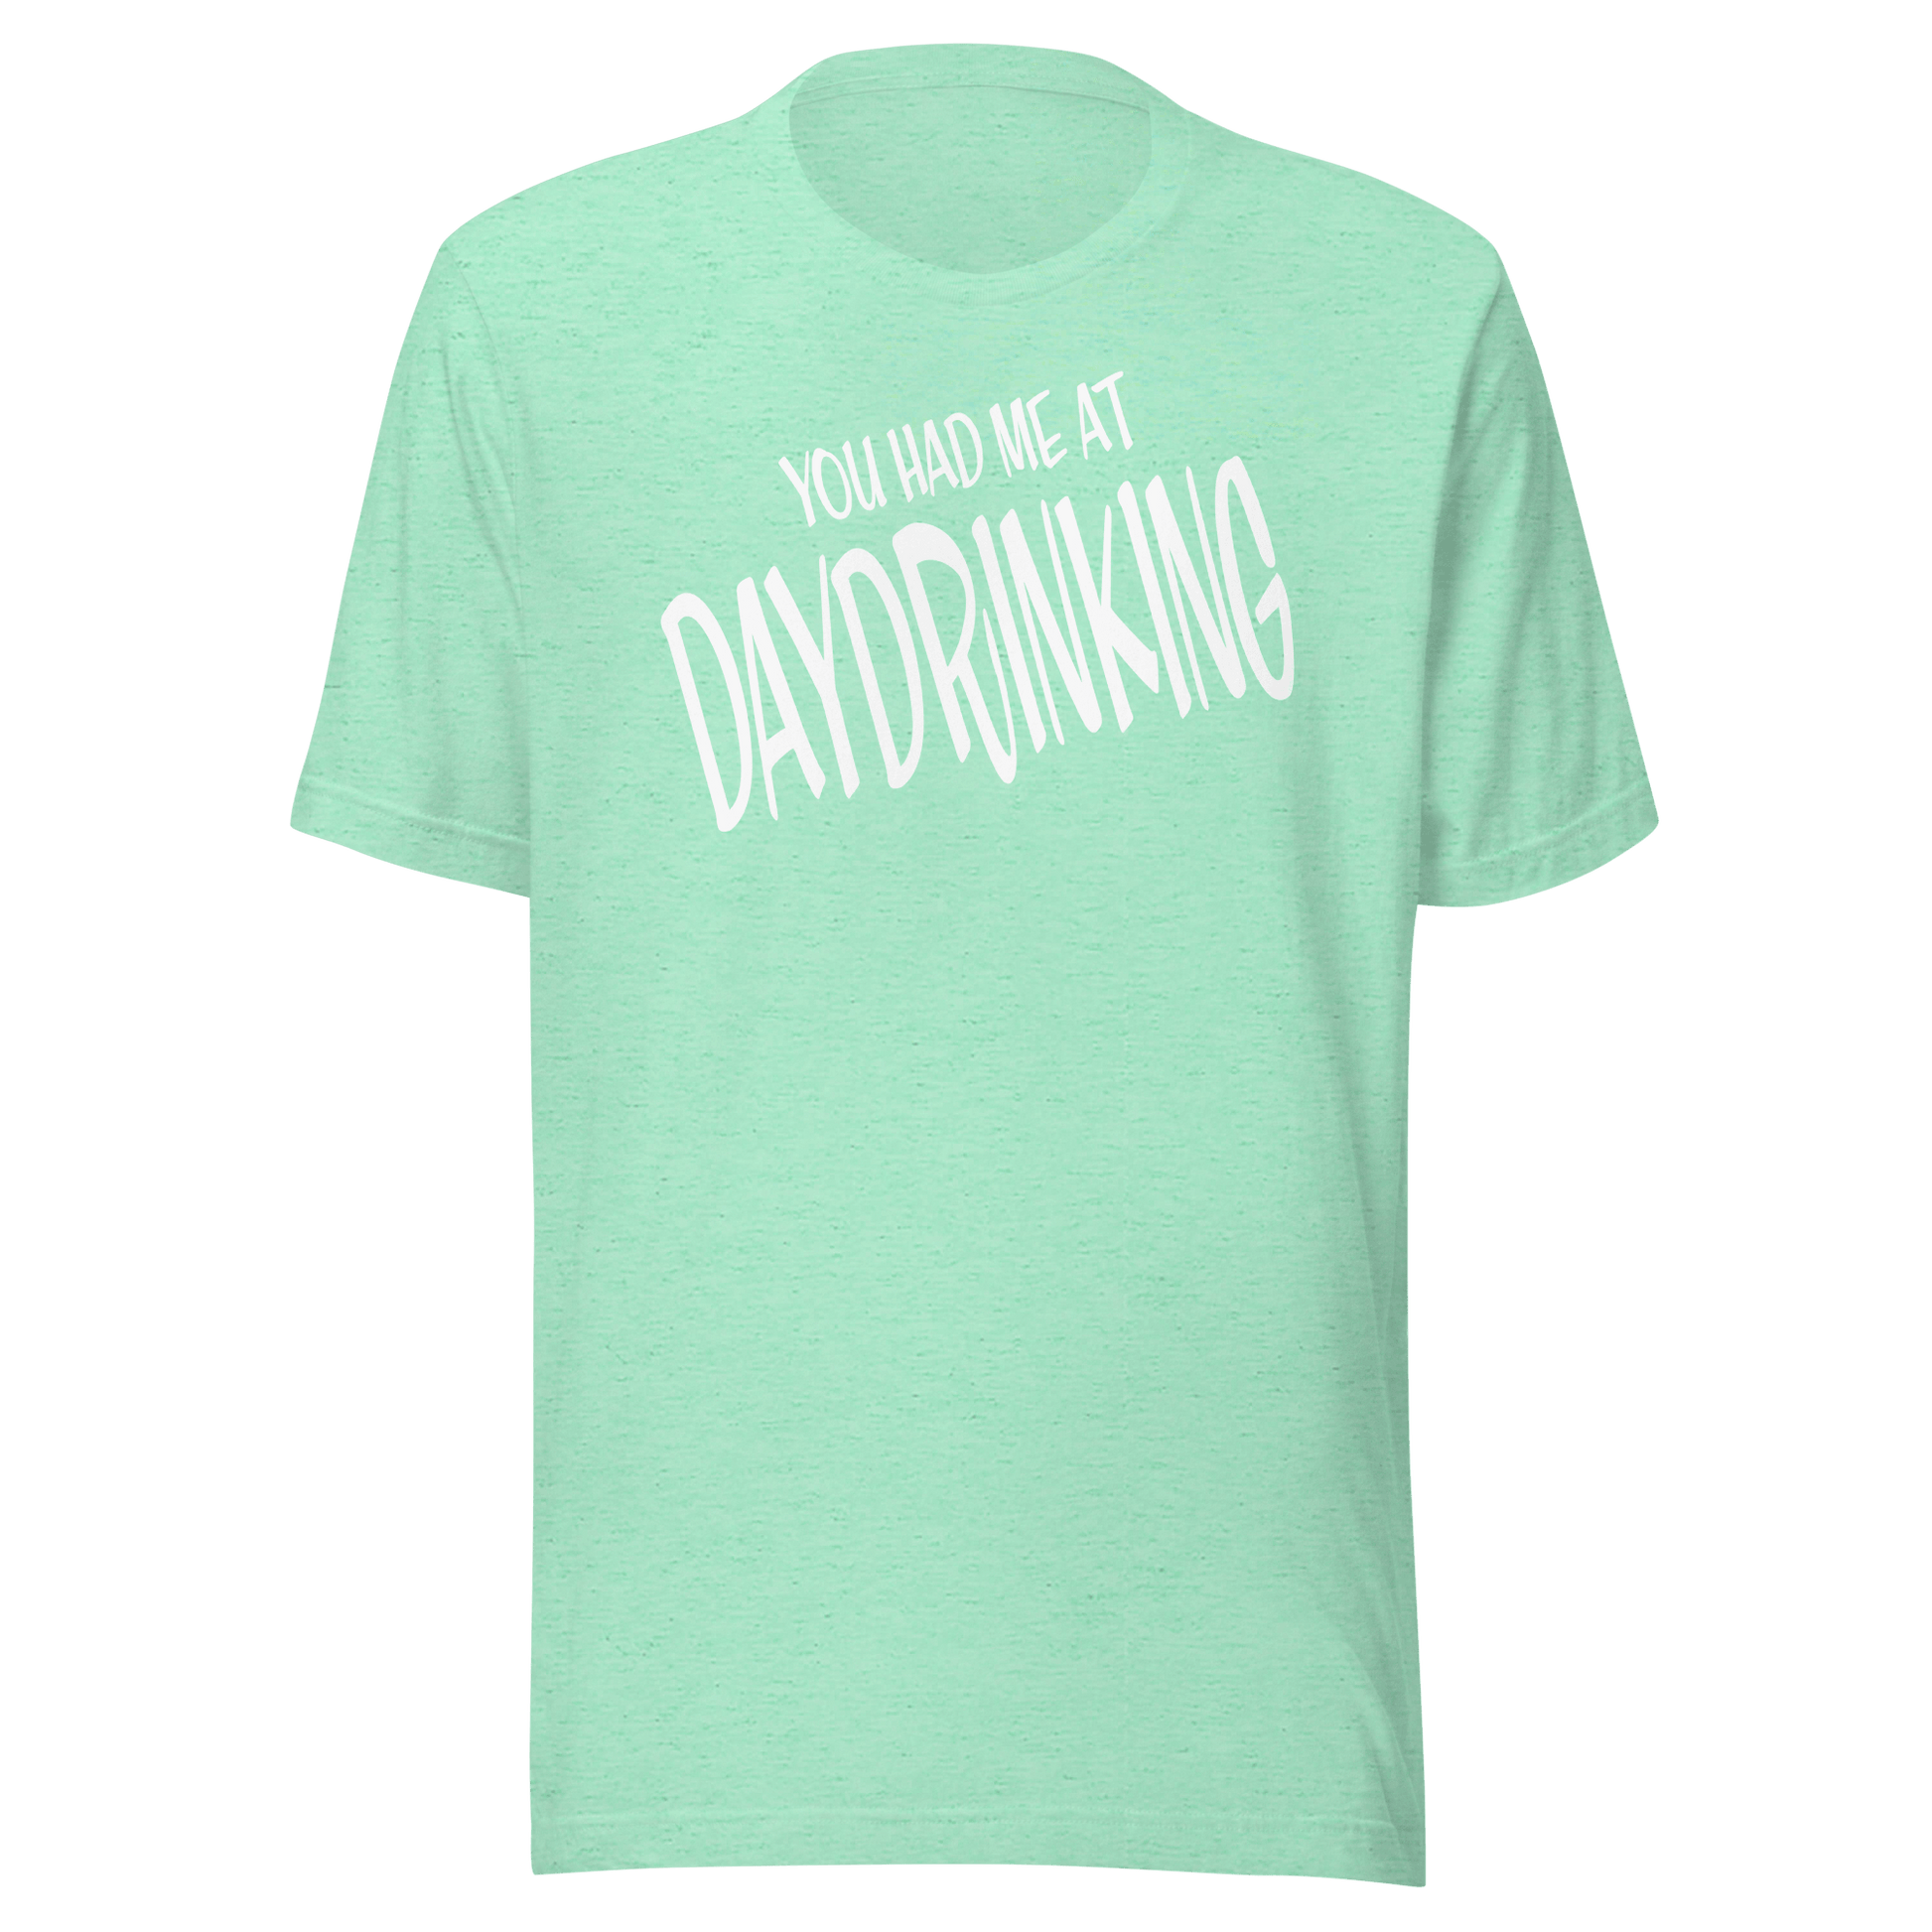 You Had Me at Daydrinking Tee | Comfy & Stylish Cotton Top DRINKING,MENS,New,SPRING BREAK,T-SHIRT,UNISEX,WOMENS Dayzzed Apparel